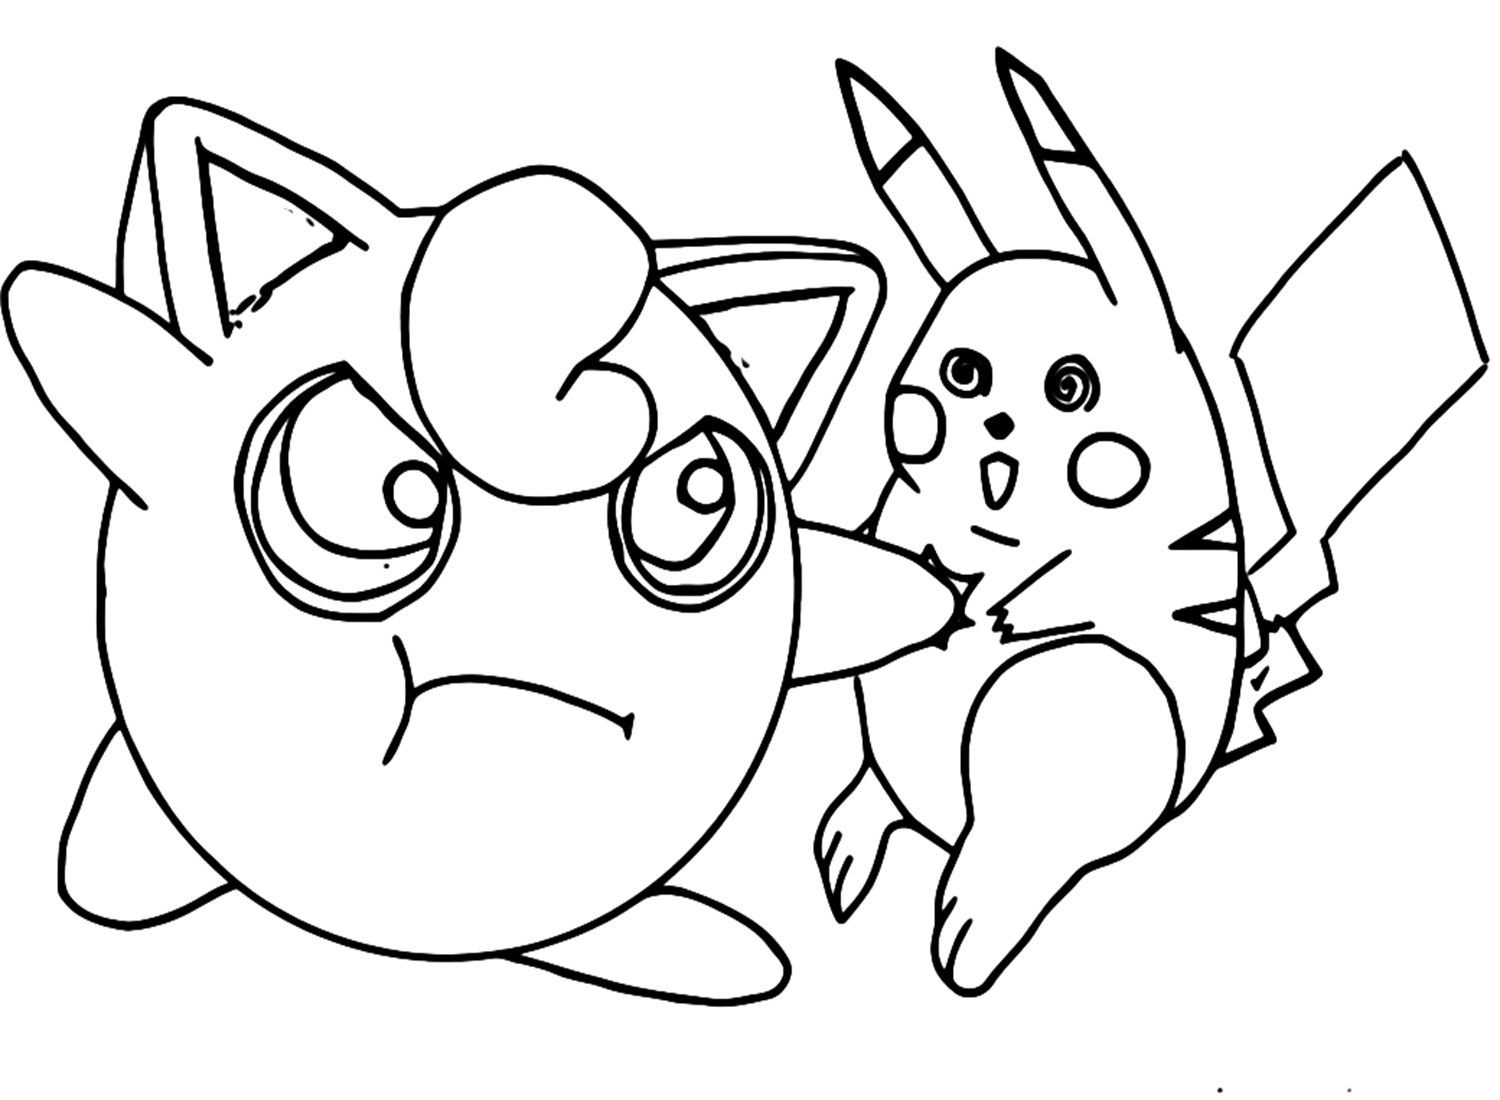 Pikachu And Jigglypuff Coloring Pages